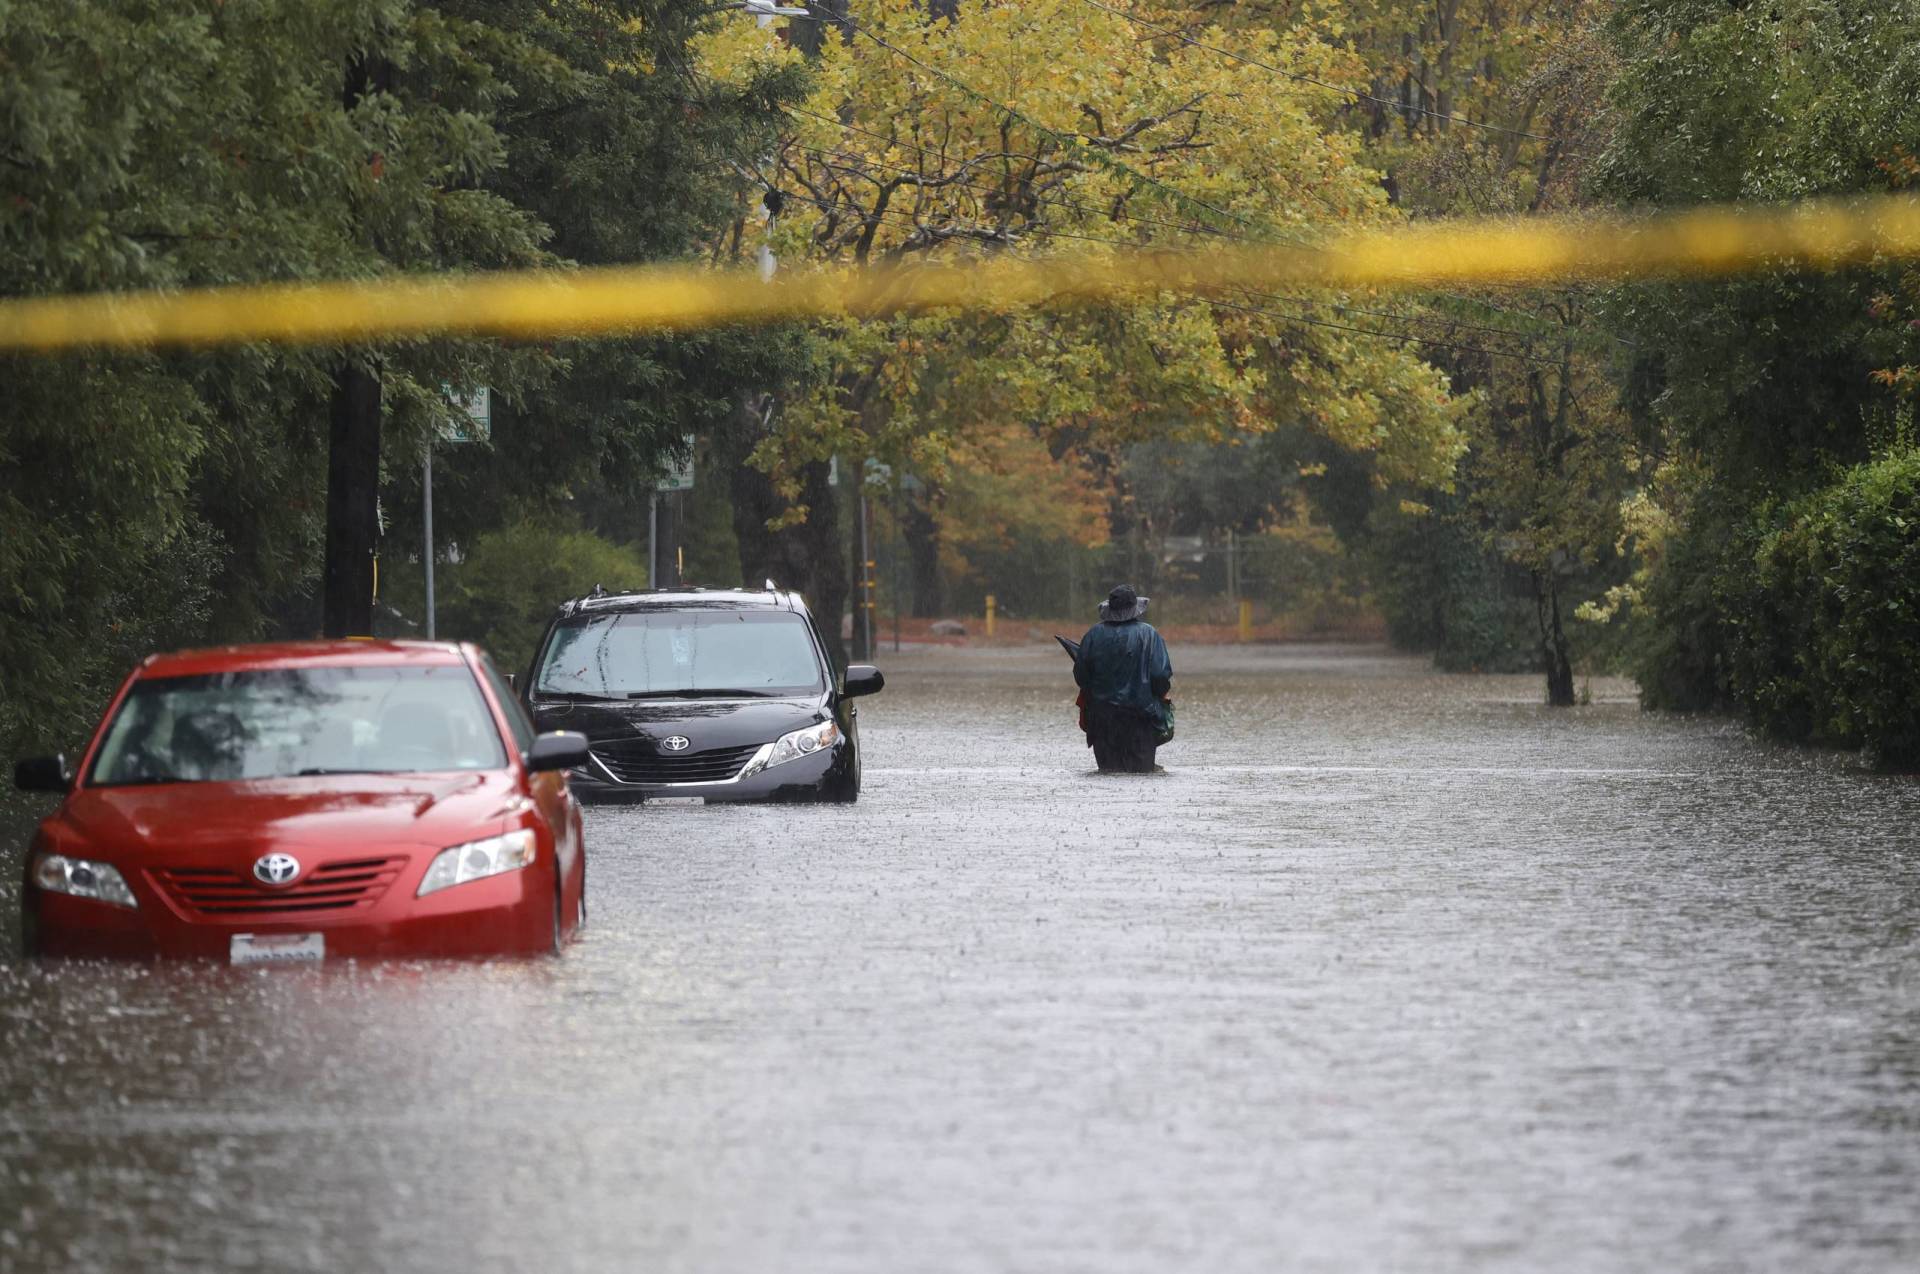 A man wades through water higher than his knees next to two parked cars past their bumpers in water, on a tree-lined street, beyond blurred yellow police tape in the foreground.